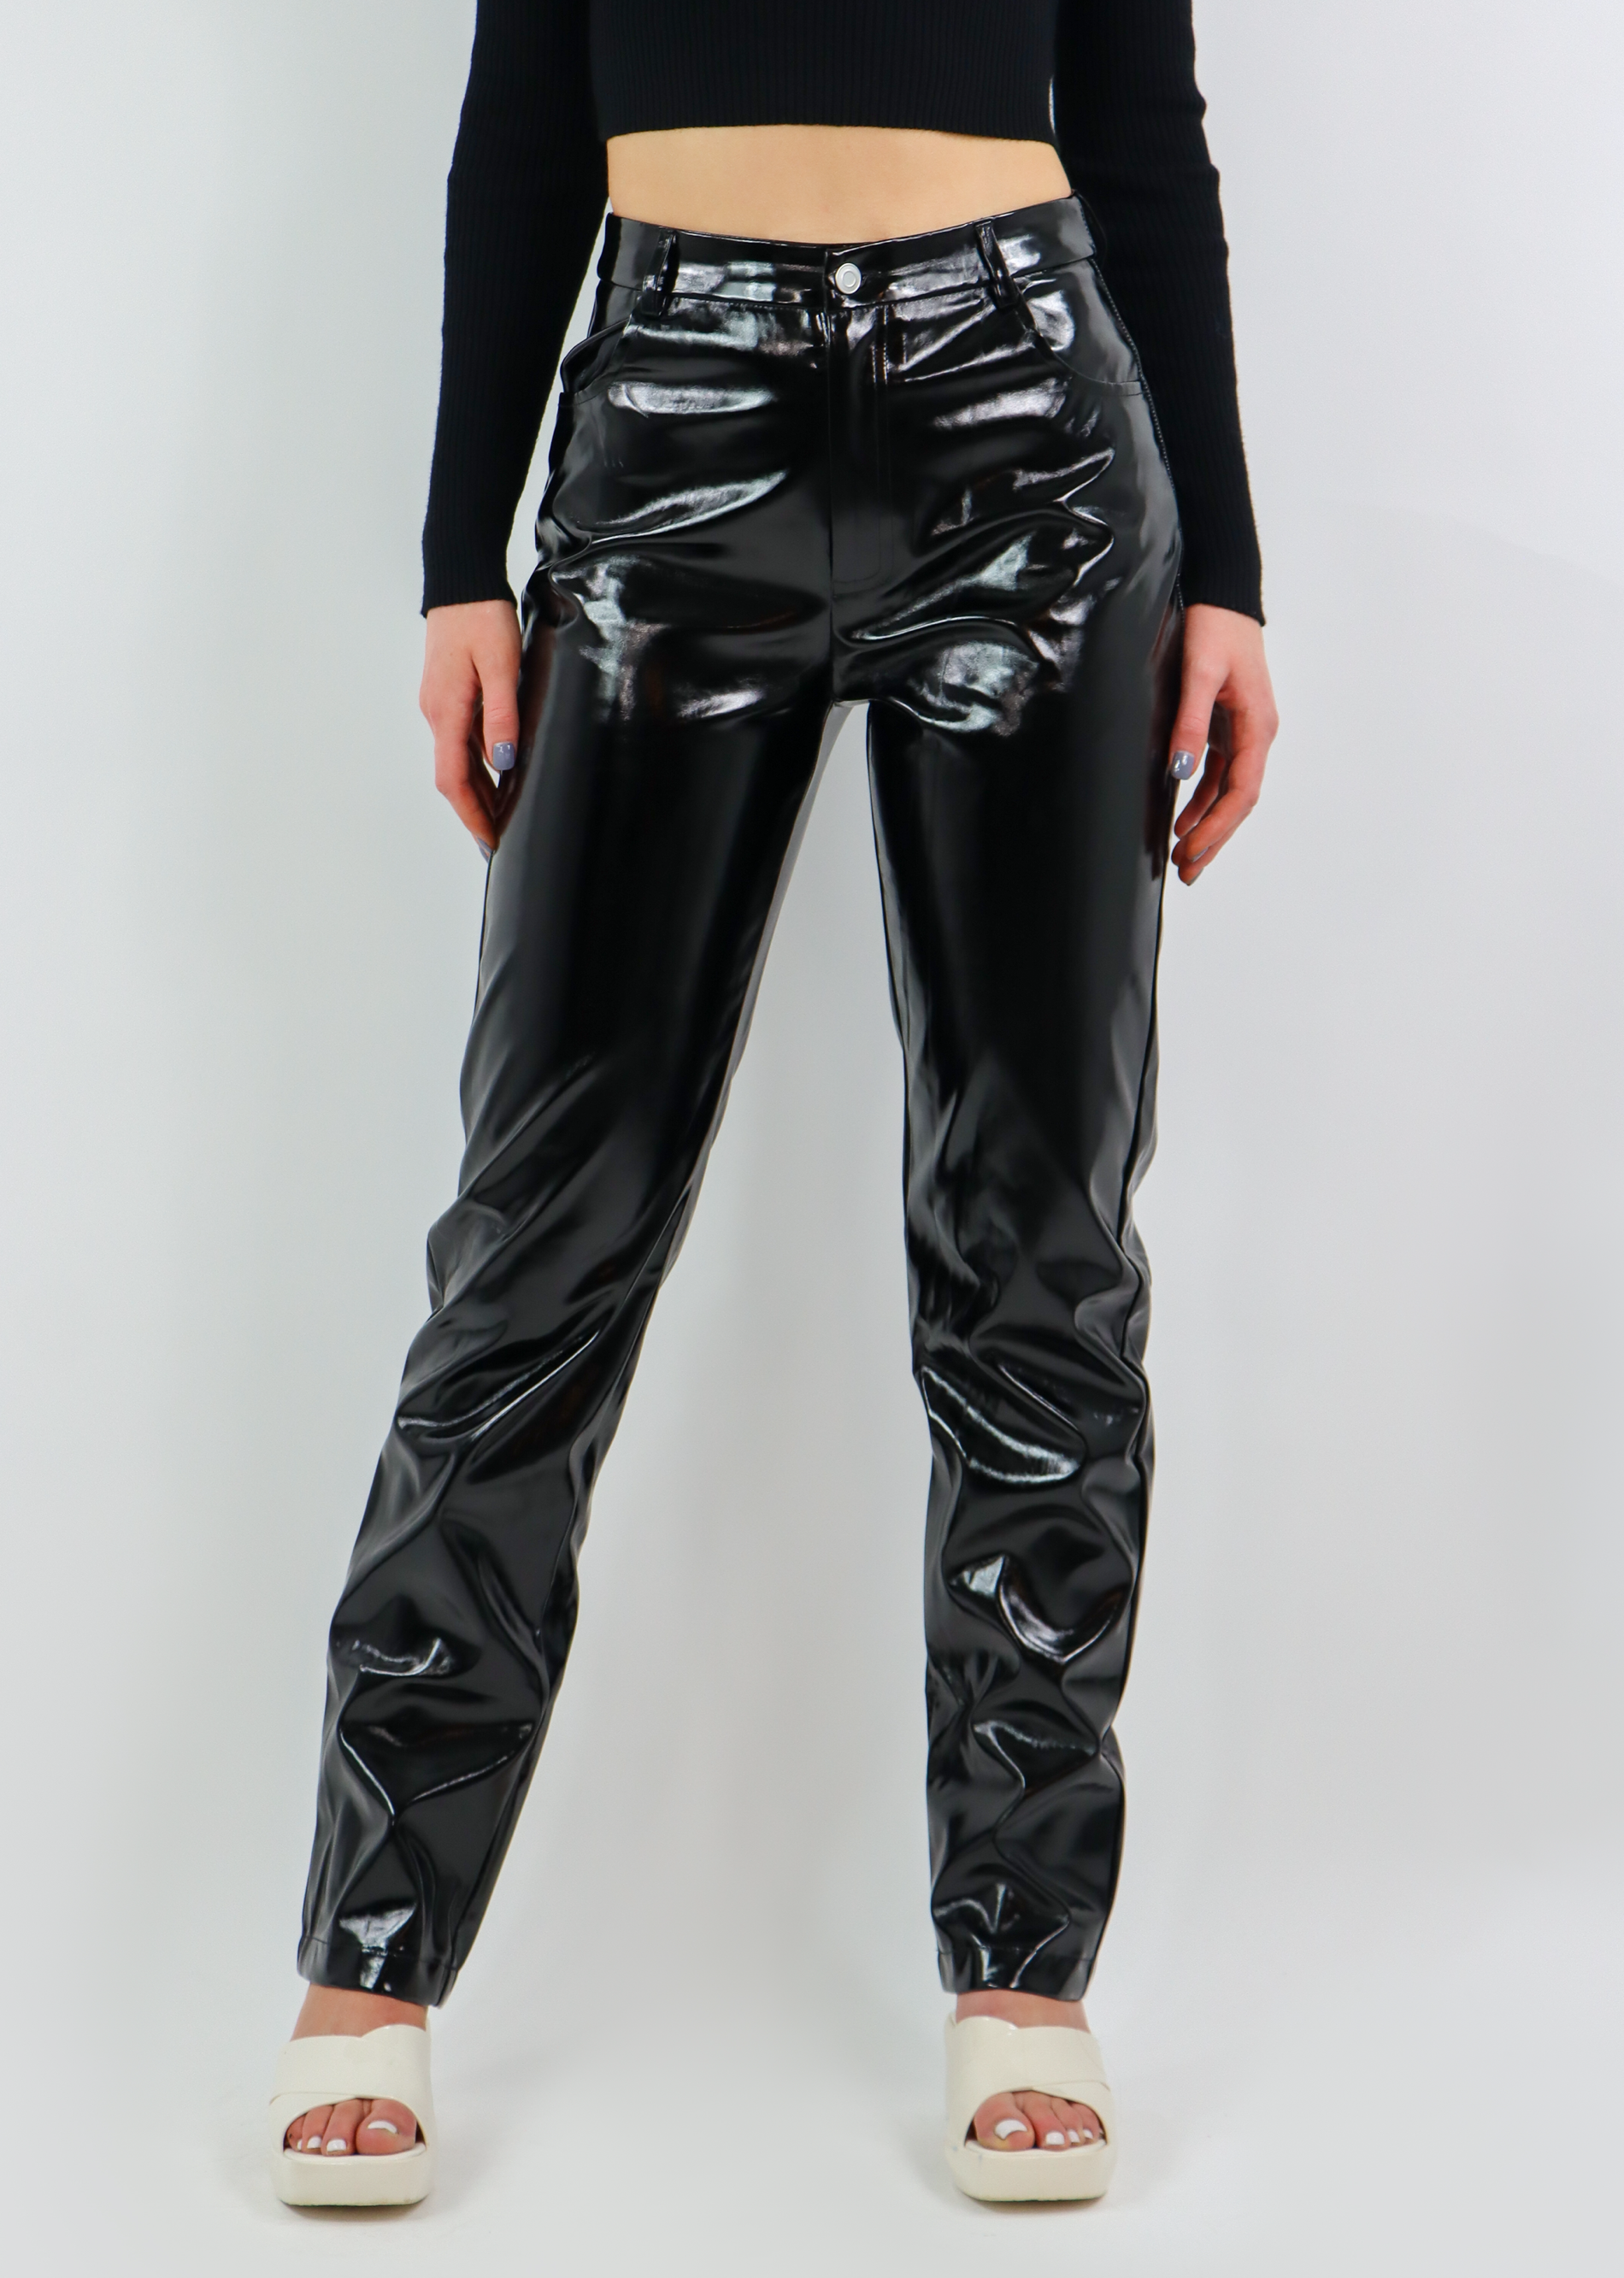 Charmed Patent Leather Pants ☆ Black – Rock N Rags